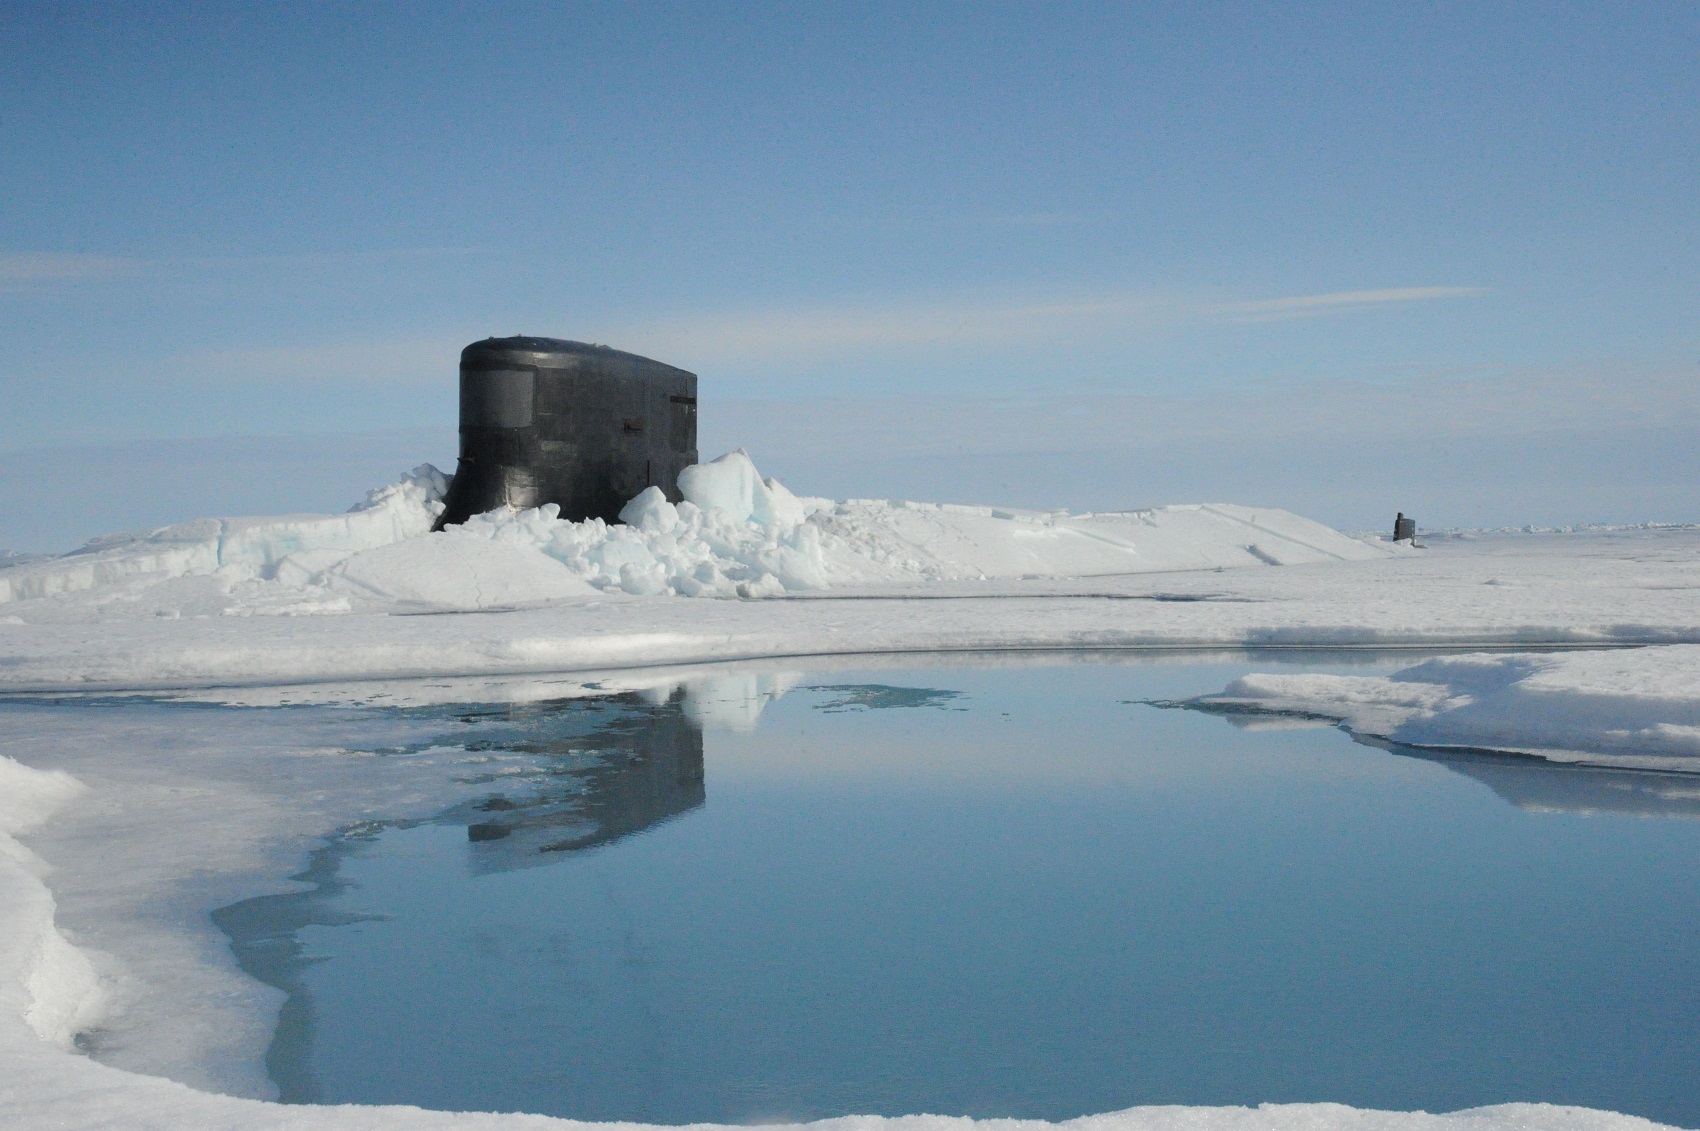 ARCTIC OCEAN (July 30, 2015) The fast attack submarine USS Seawolf (SSN 21) surfaces through Arctic ice at the North Pole. Seawolf conducted routine Arctic operations. U.S. Navy photo 